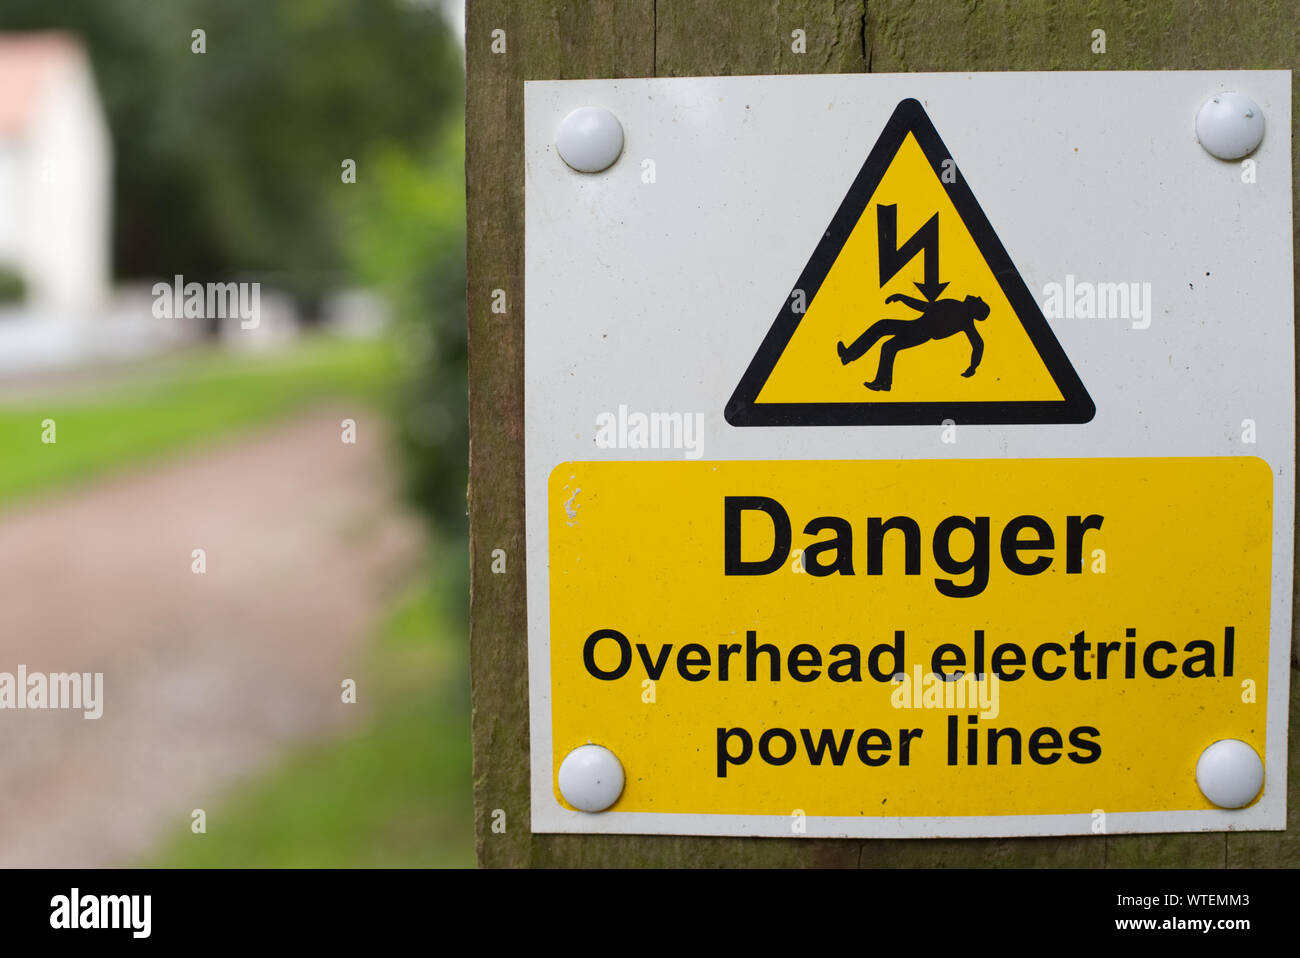 Danger overhead electrical power lines warning sign on wooden post with out of focus background Stock Photo